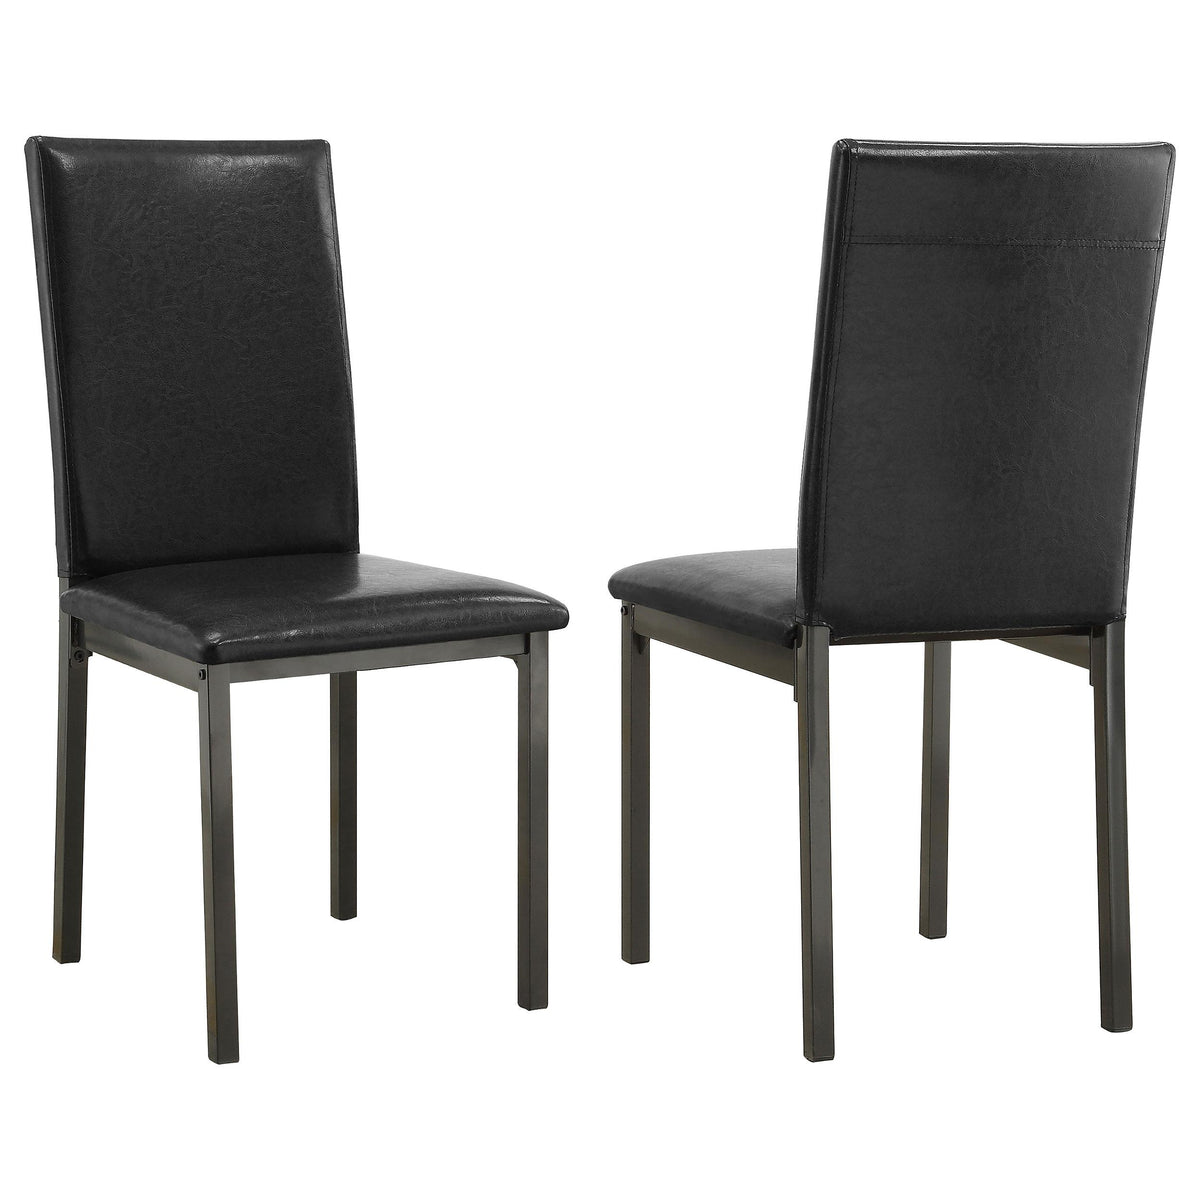 Garza Upholstered Dining Chairs Black (Set of 2) Garza Upholstered Dining Chairs Black (Set of 2) Half Price Furniture